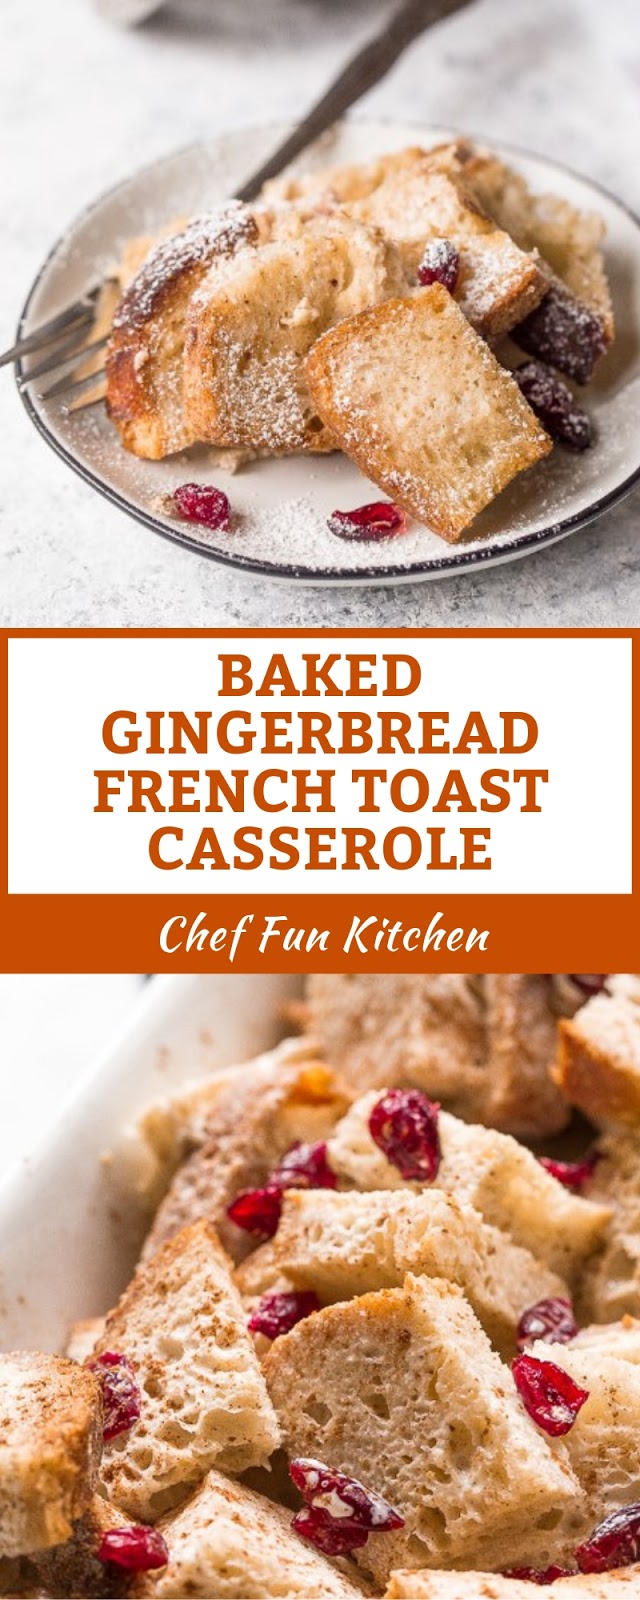 BAKED GINGERBREAD FRENCH TOAST CASSEROLE